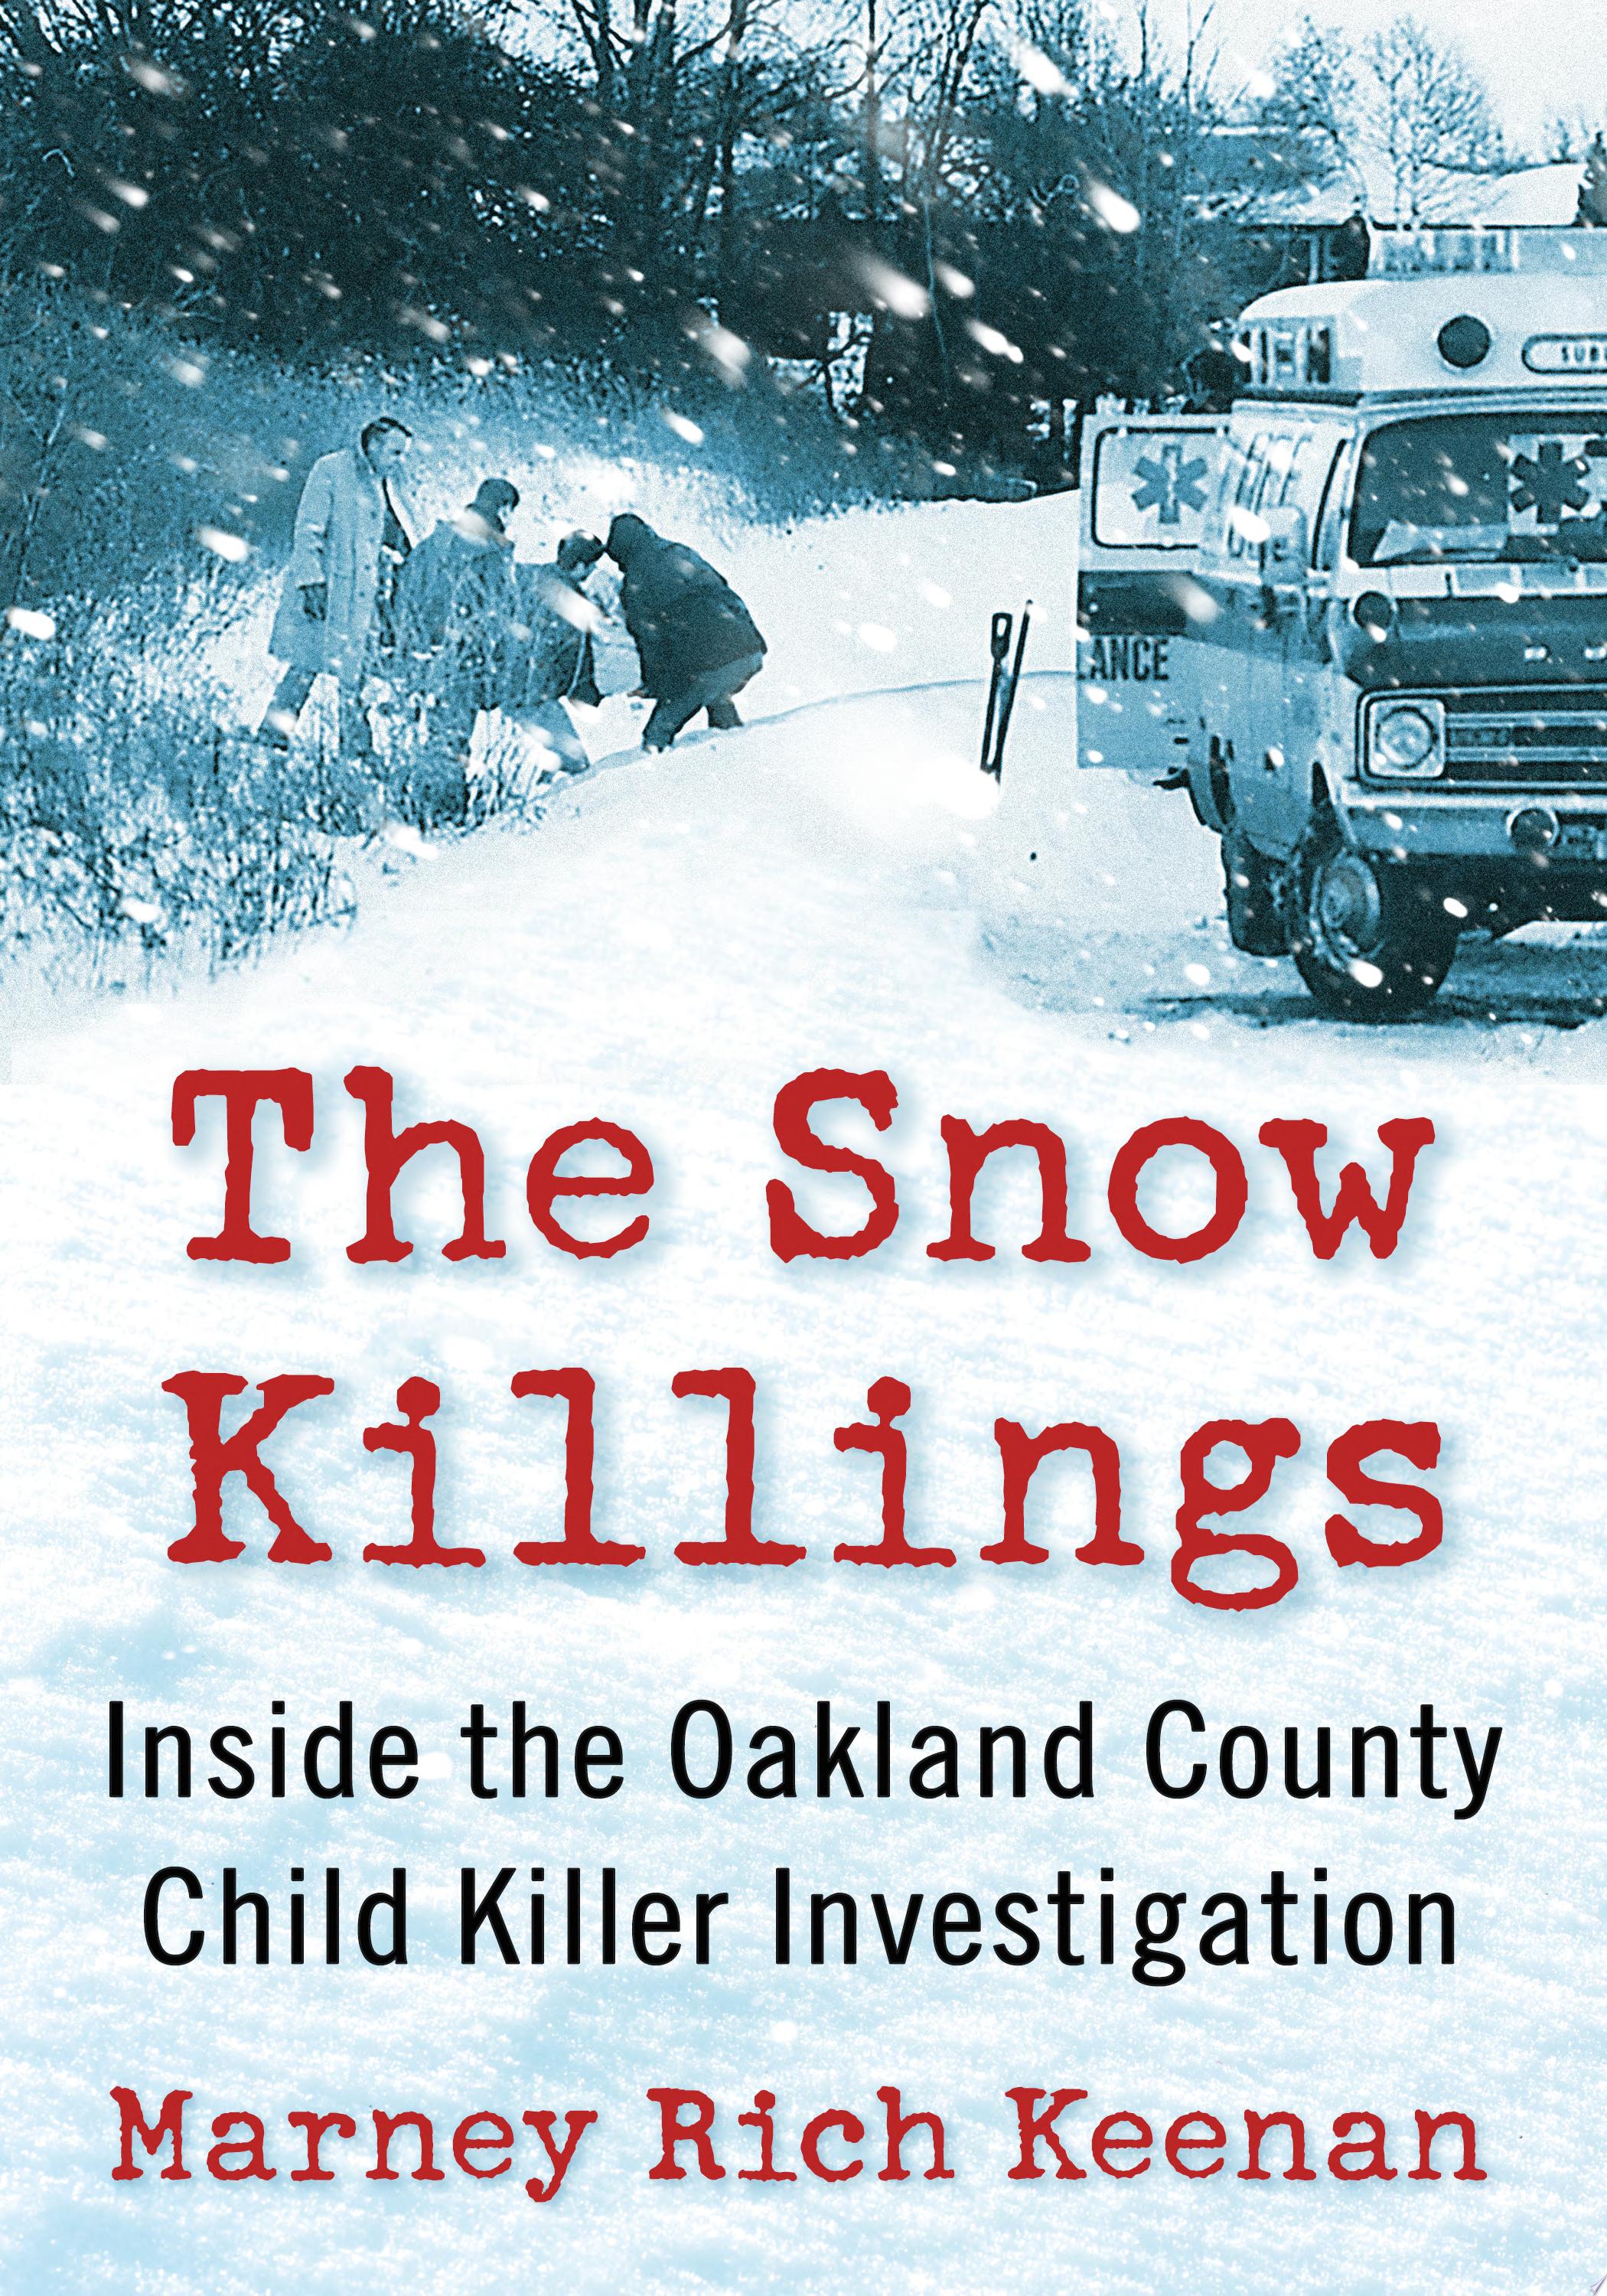 Image for "The Snow Killings"